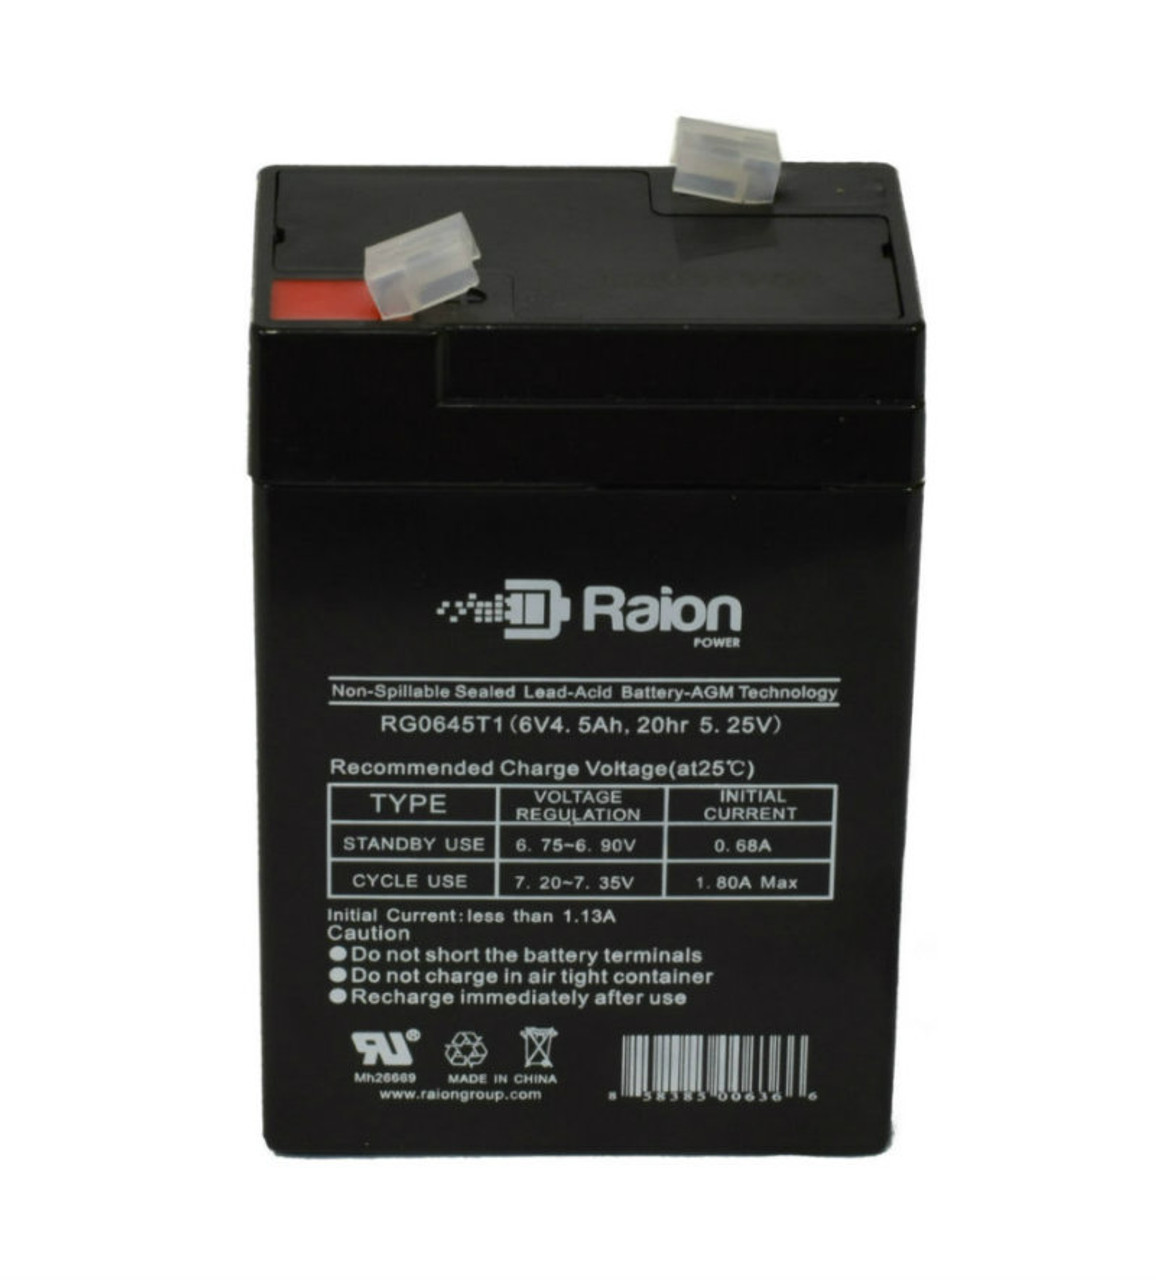 Raion Power RG0645T1 Replacement Battery Cartridge for Dorcy Spotlight 41-1054